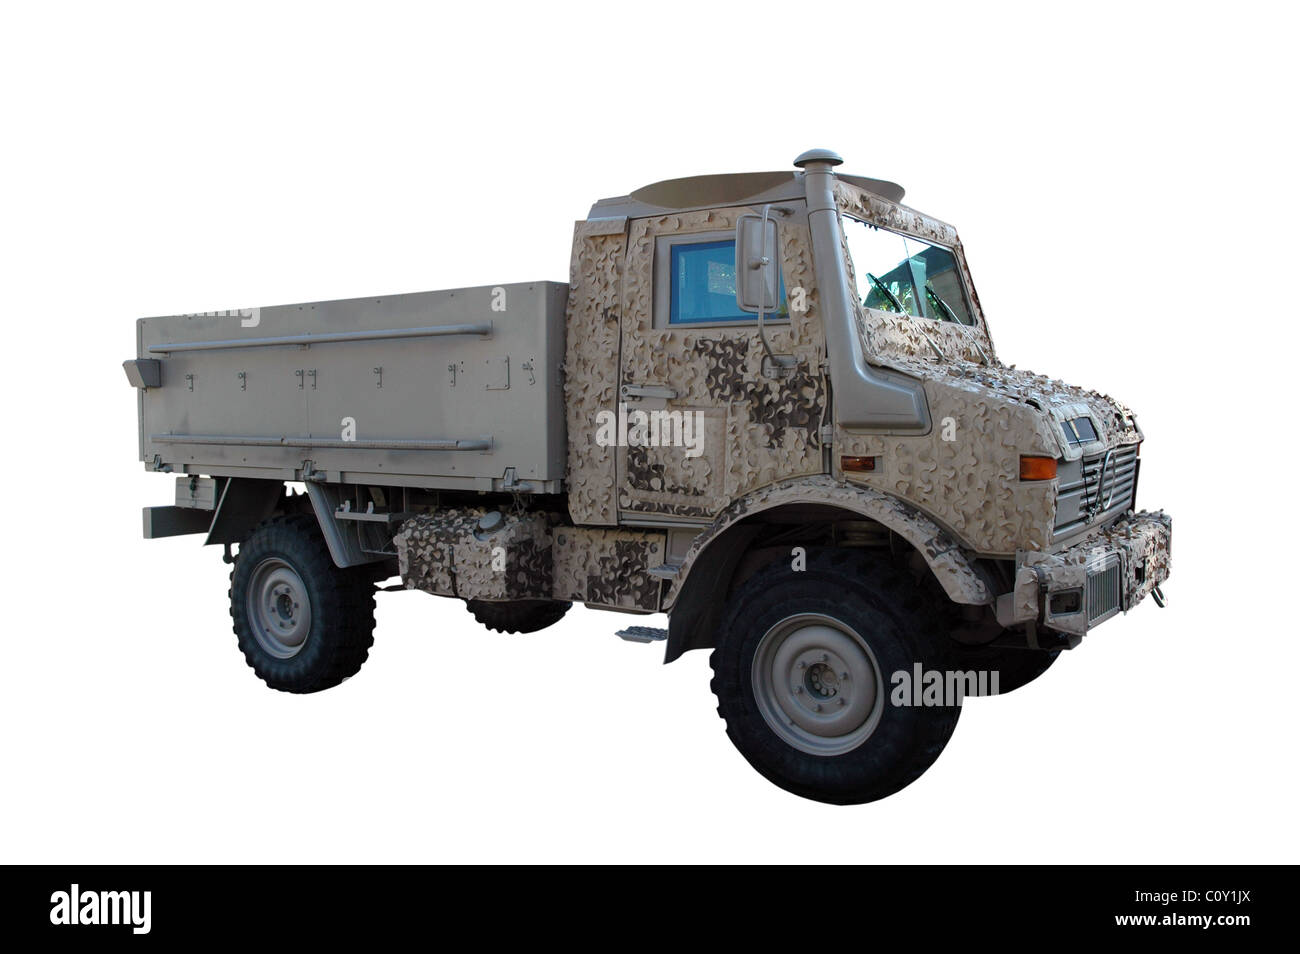 Army truck isolated on white Stock Photo